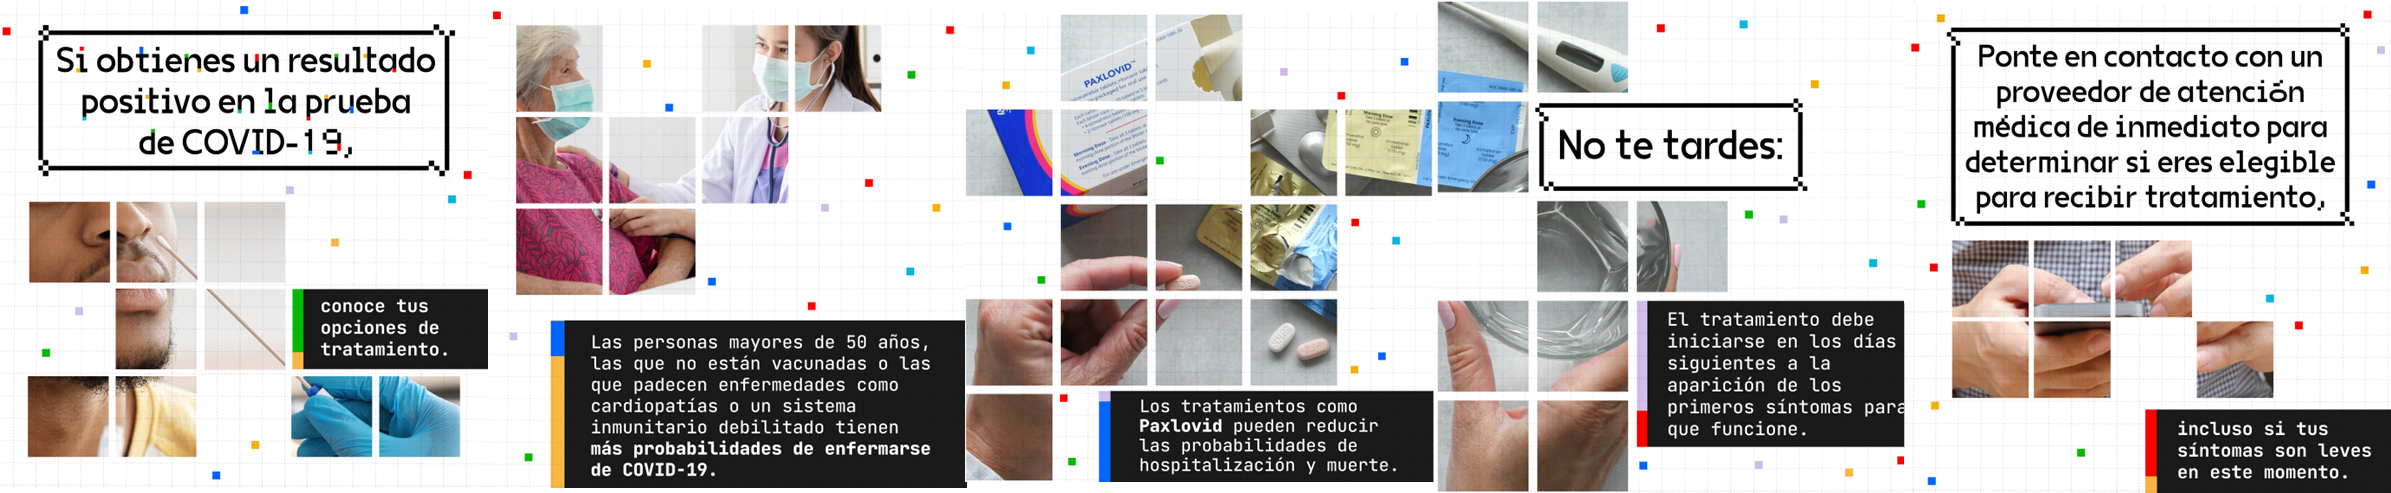 IImages and text in Spanish depicting COVID treatment options for the elderly, the immunocompromised, and unvaccinated; the images and text also encourage the same populations to seek medical help even if their symptoms are mild. Images show man being swabbed, masked doctor touching arm of older masked lady, Paxlovid, and a person's hands texting on a phone.